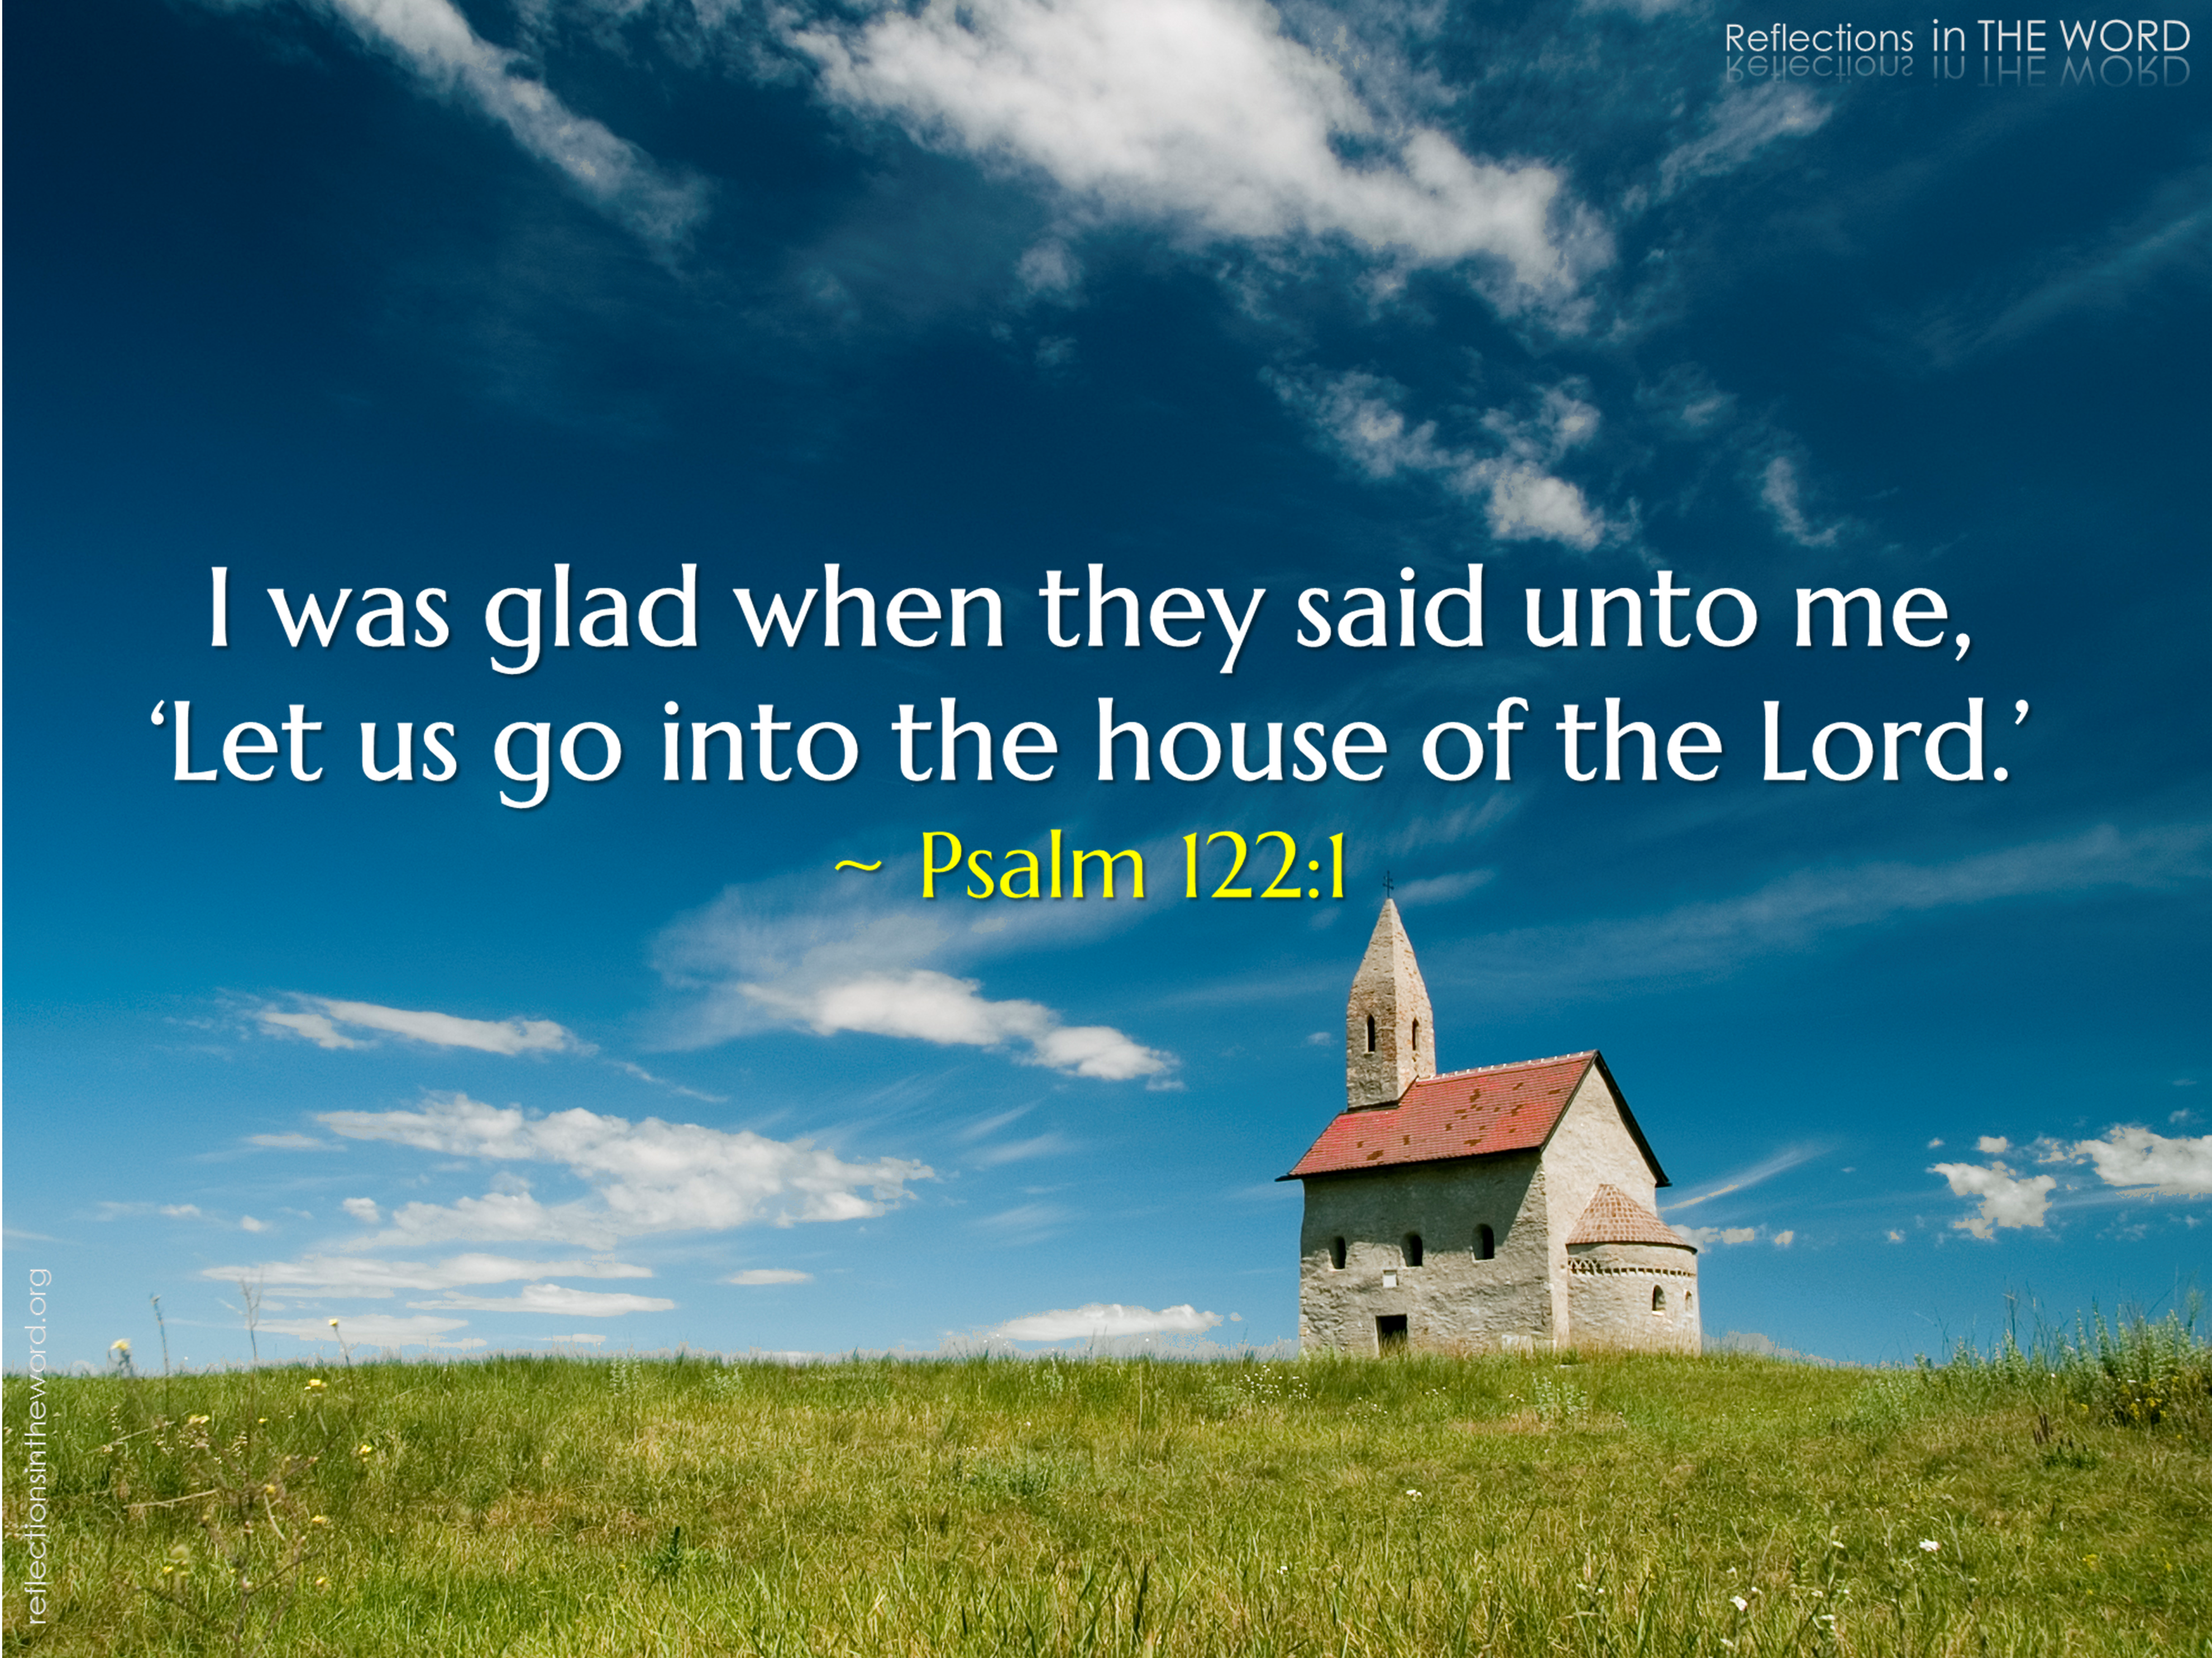 http://evangelicious.files.wordpress.com/2013/08/psalm-122_1.png